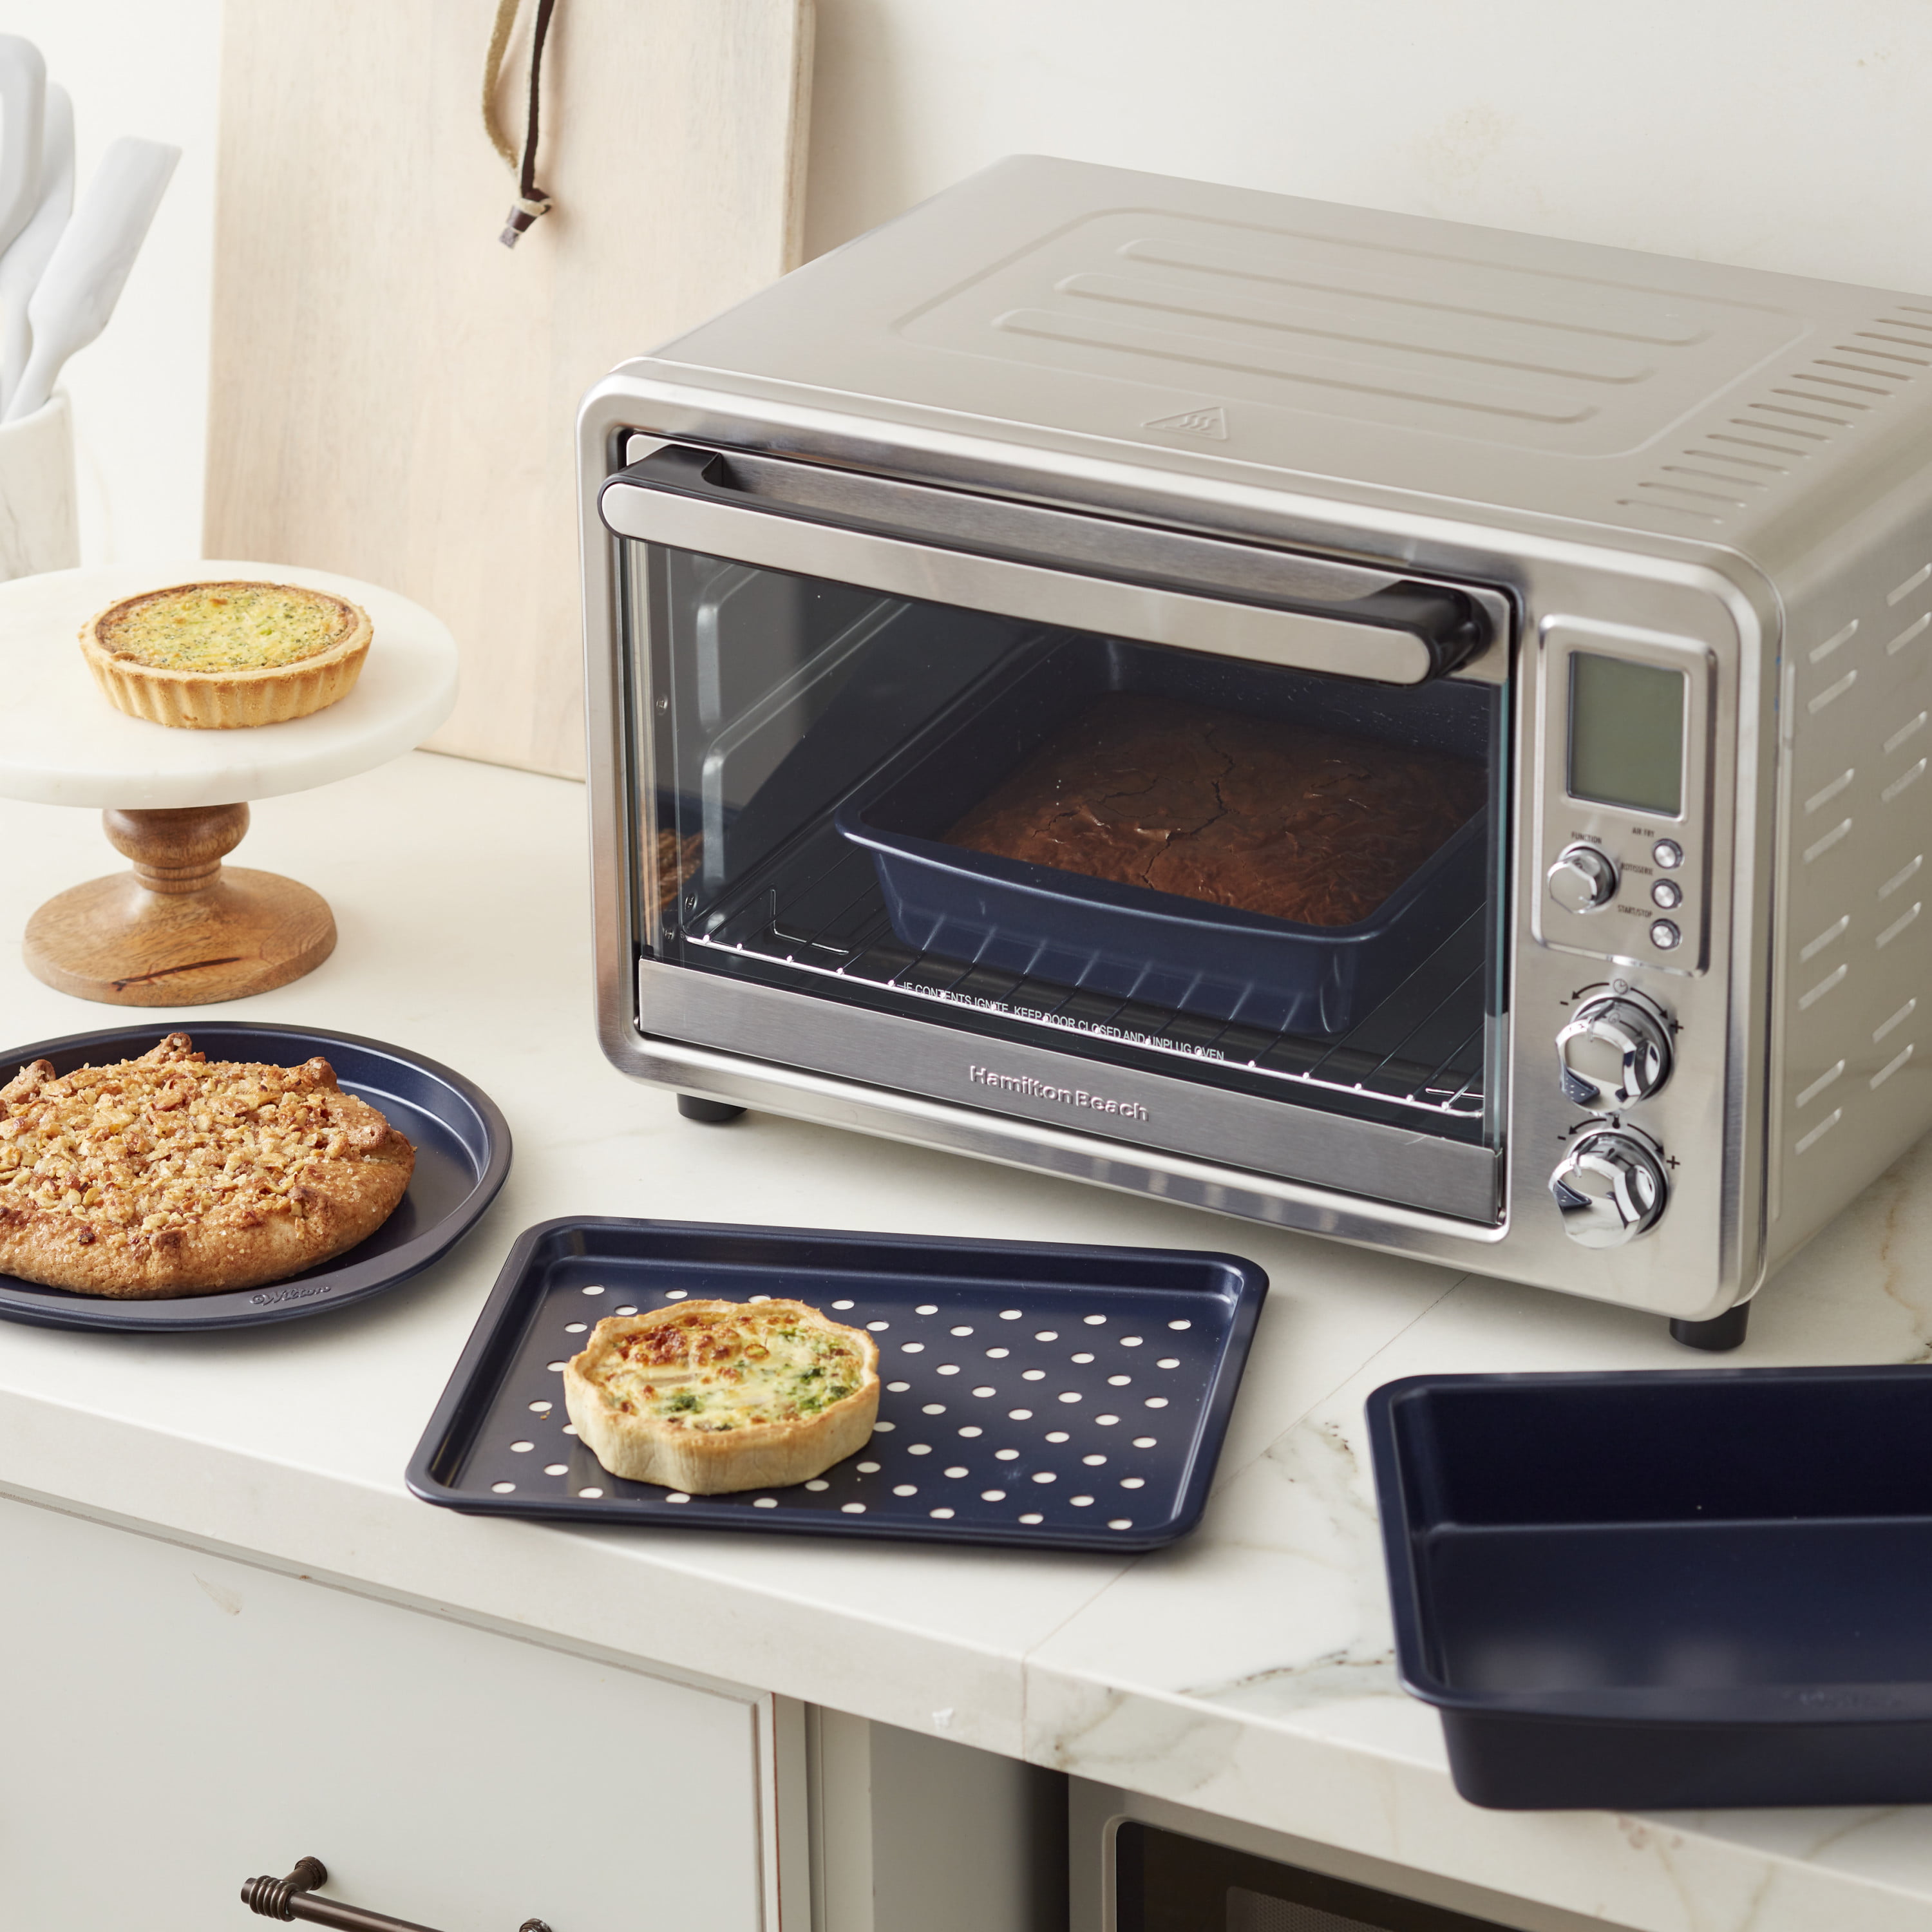 Toaster Oven Baking Pans and Dessert Recipes, Wilton's Baking Blog